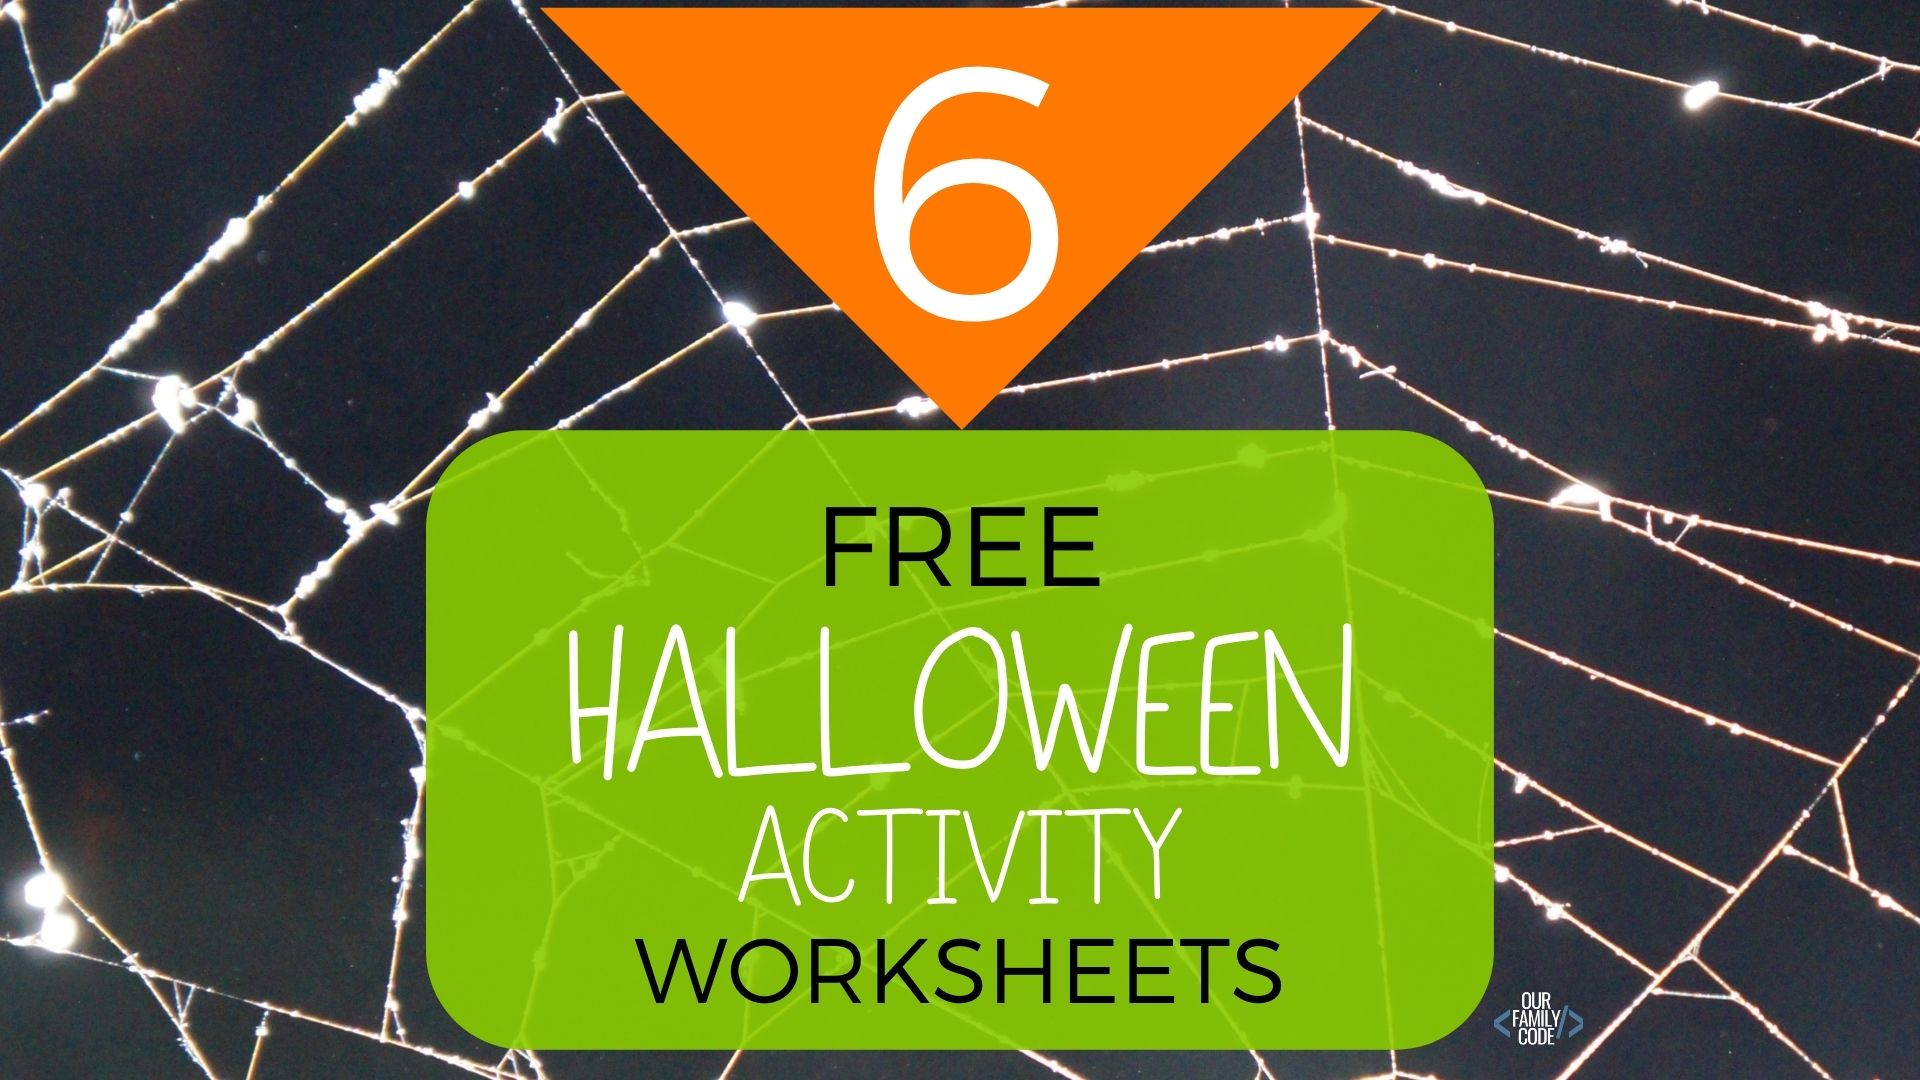 free halloween activity worksheets These free Halloween worksheets for kids feature a Halloween I-Spy, Halloween Word Search, Pumpkin Number Recognition, Ghost Letter Recognition, Pumpkin Coloring Page, & Less Than or Greater Than Pumpkins!